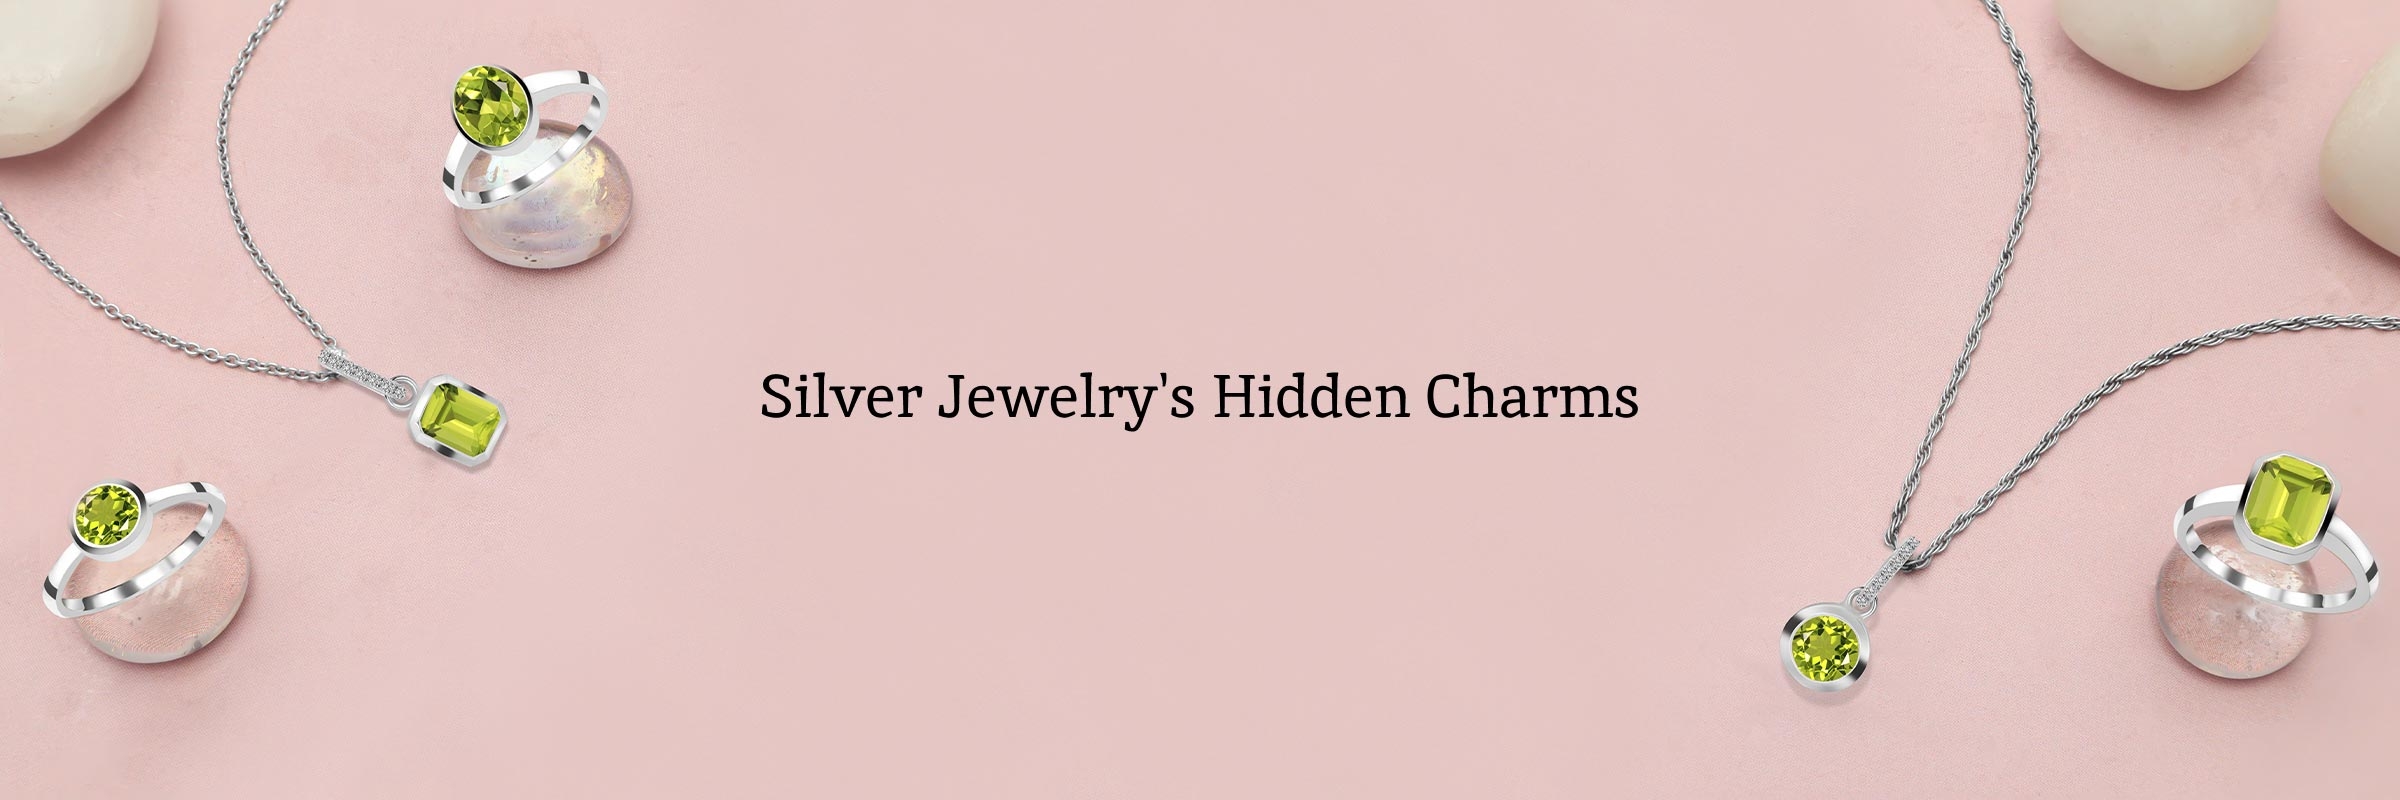 What to look for when choosing silver jewelry